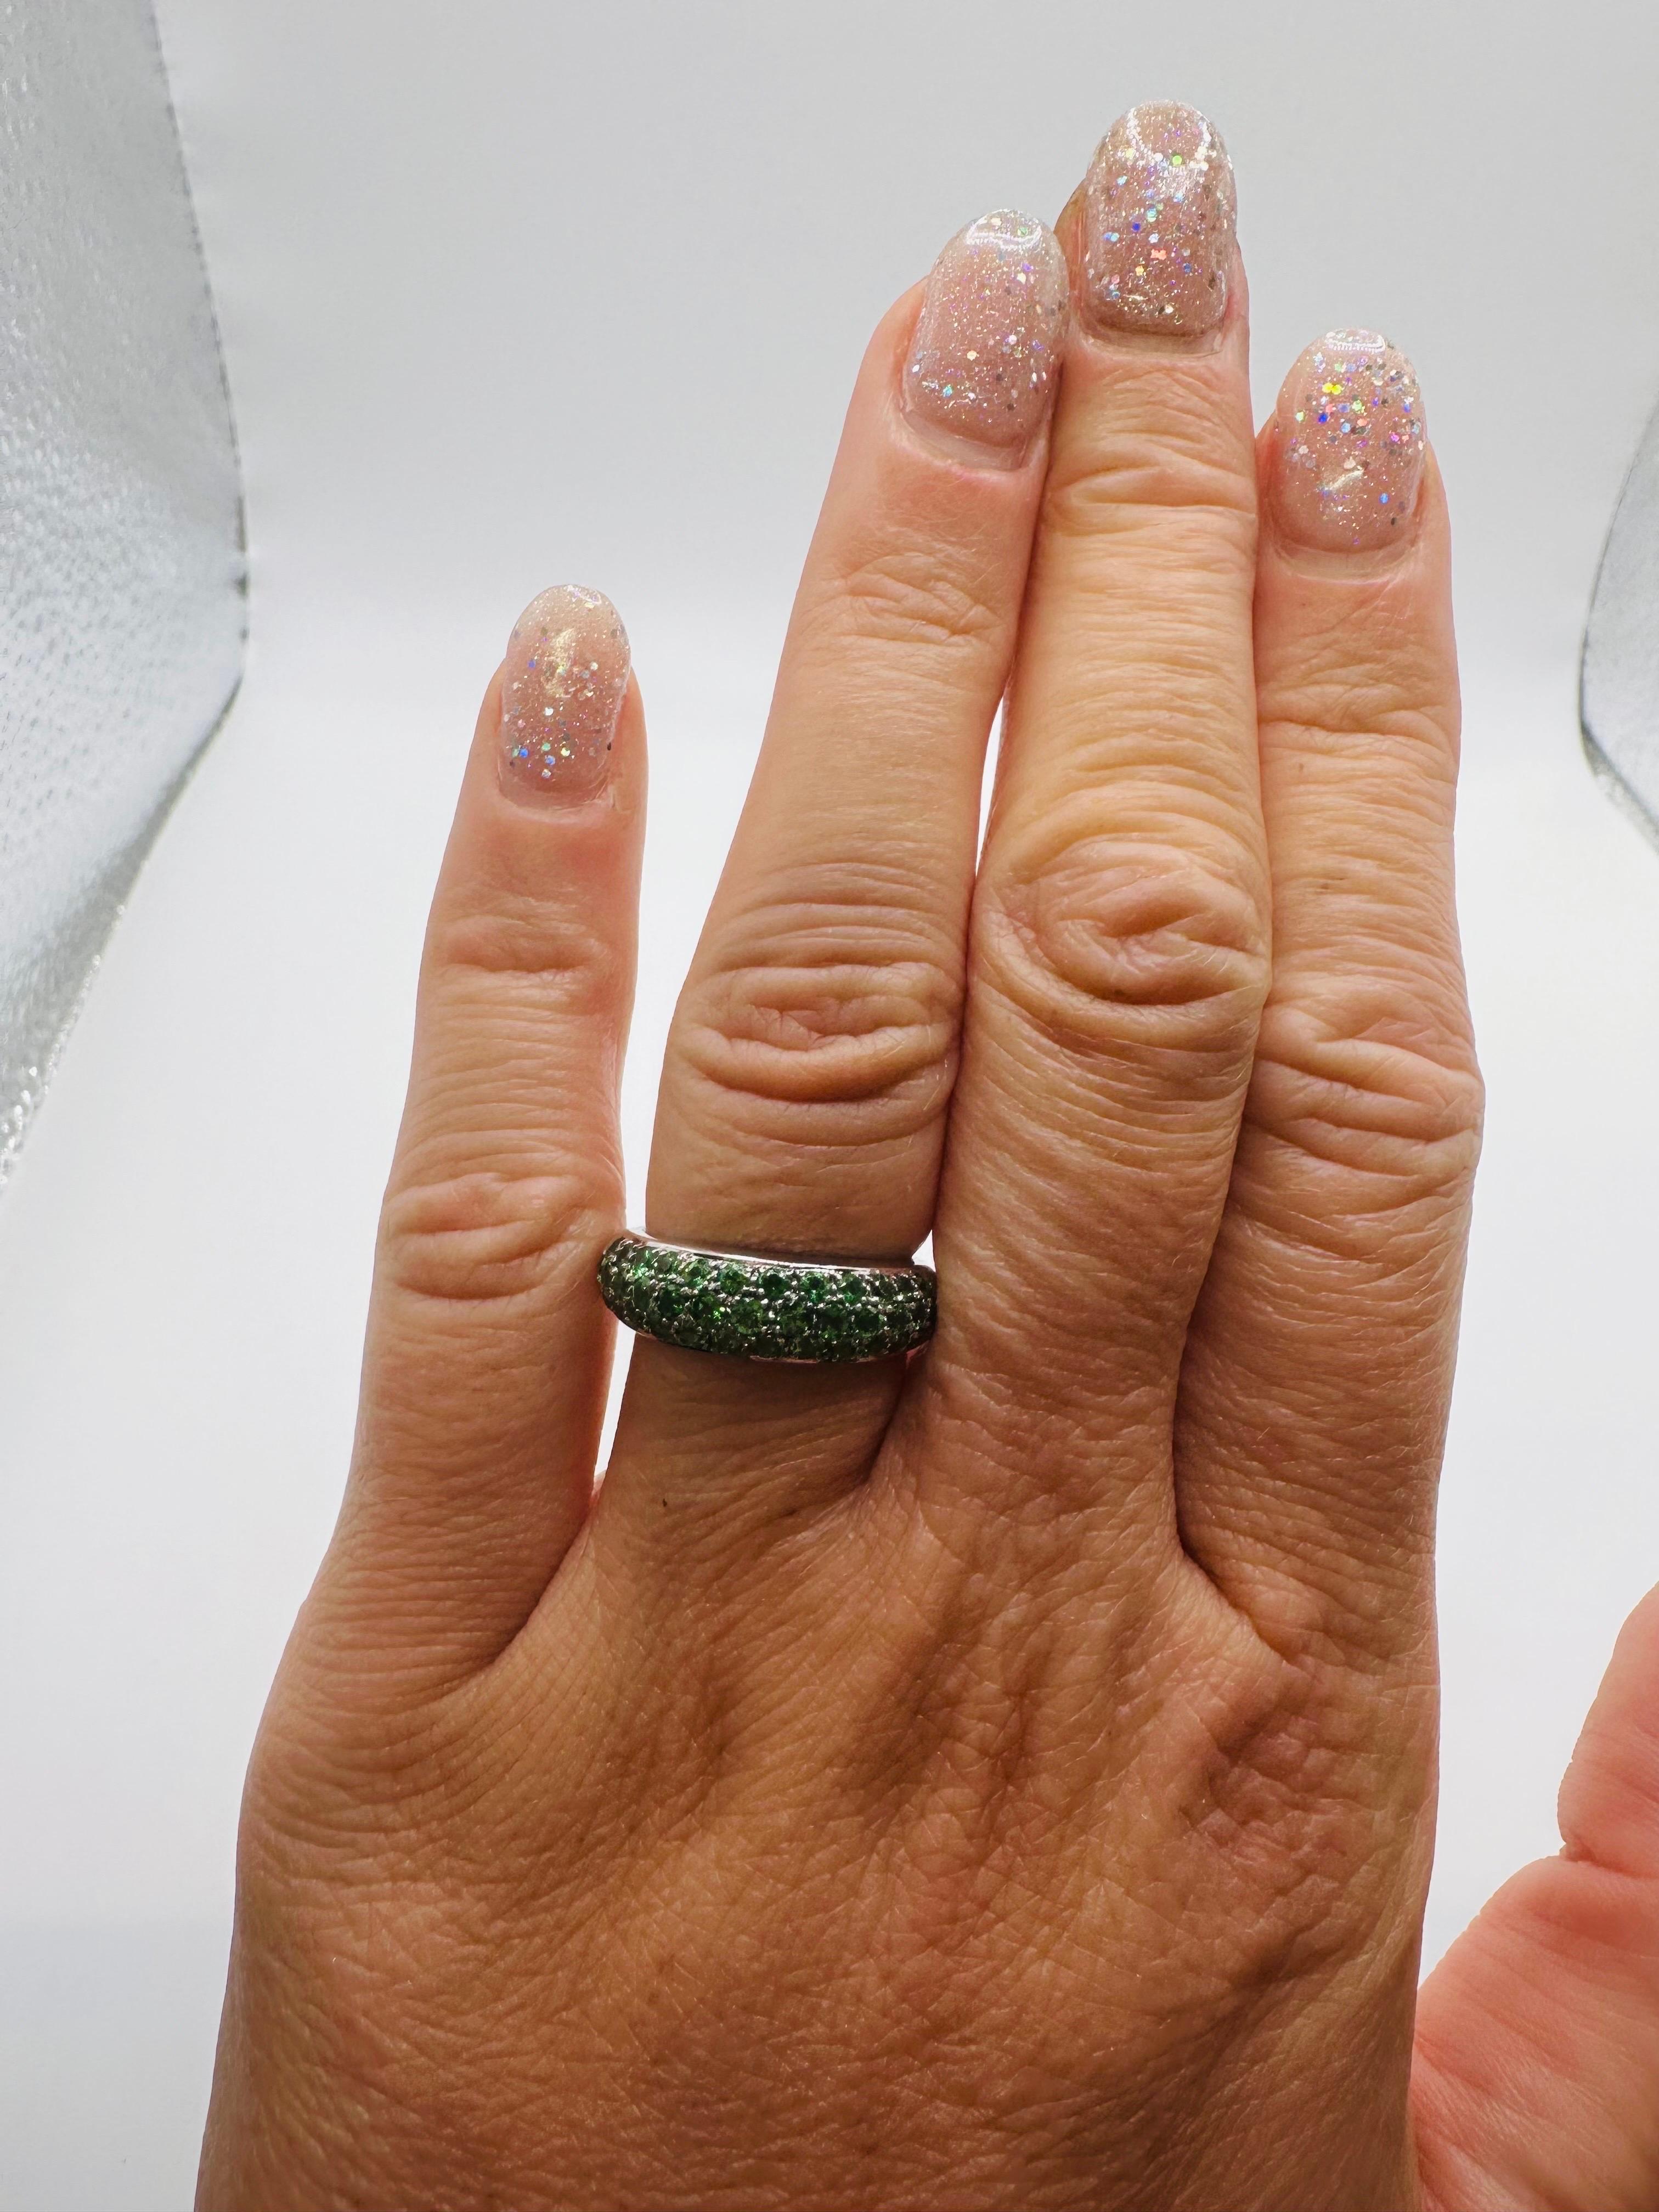 Amazinf green gemstone ring in platinum with over 2 carats of green garnets. (ring will take 10 days to process.)

METAL: platinum
NATURAL GARNET (S)
Clarity/Color: Slightly Included/Green
Carat:2

WHAT YOU GET AT STAMPAR JEWELERS:
Stampar Jewelers,